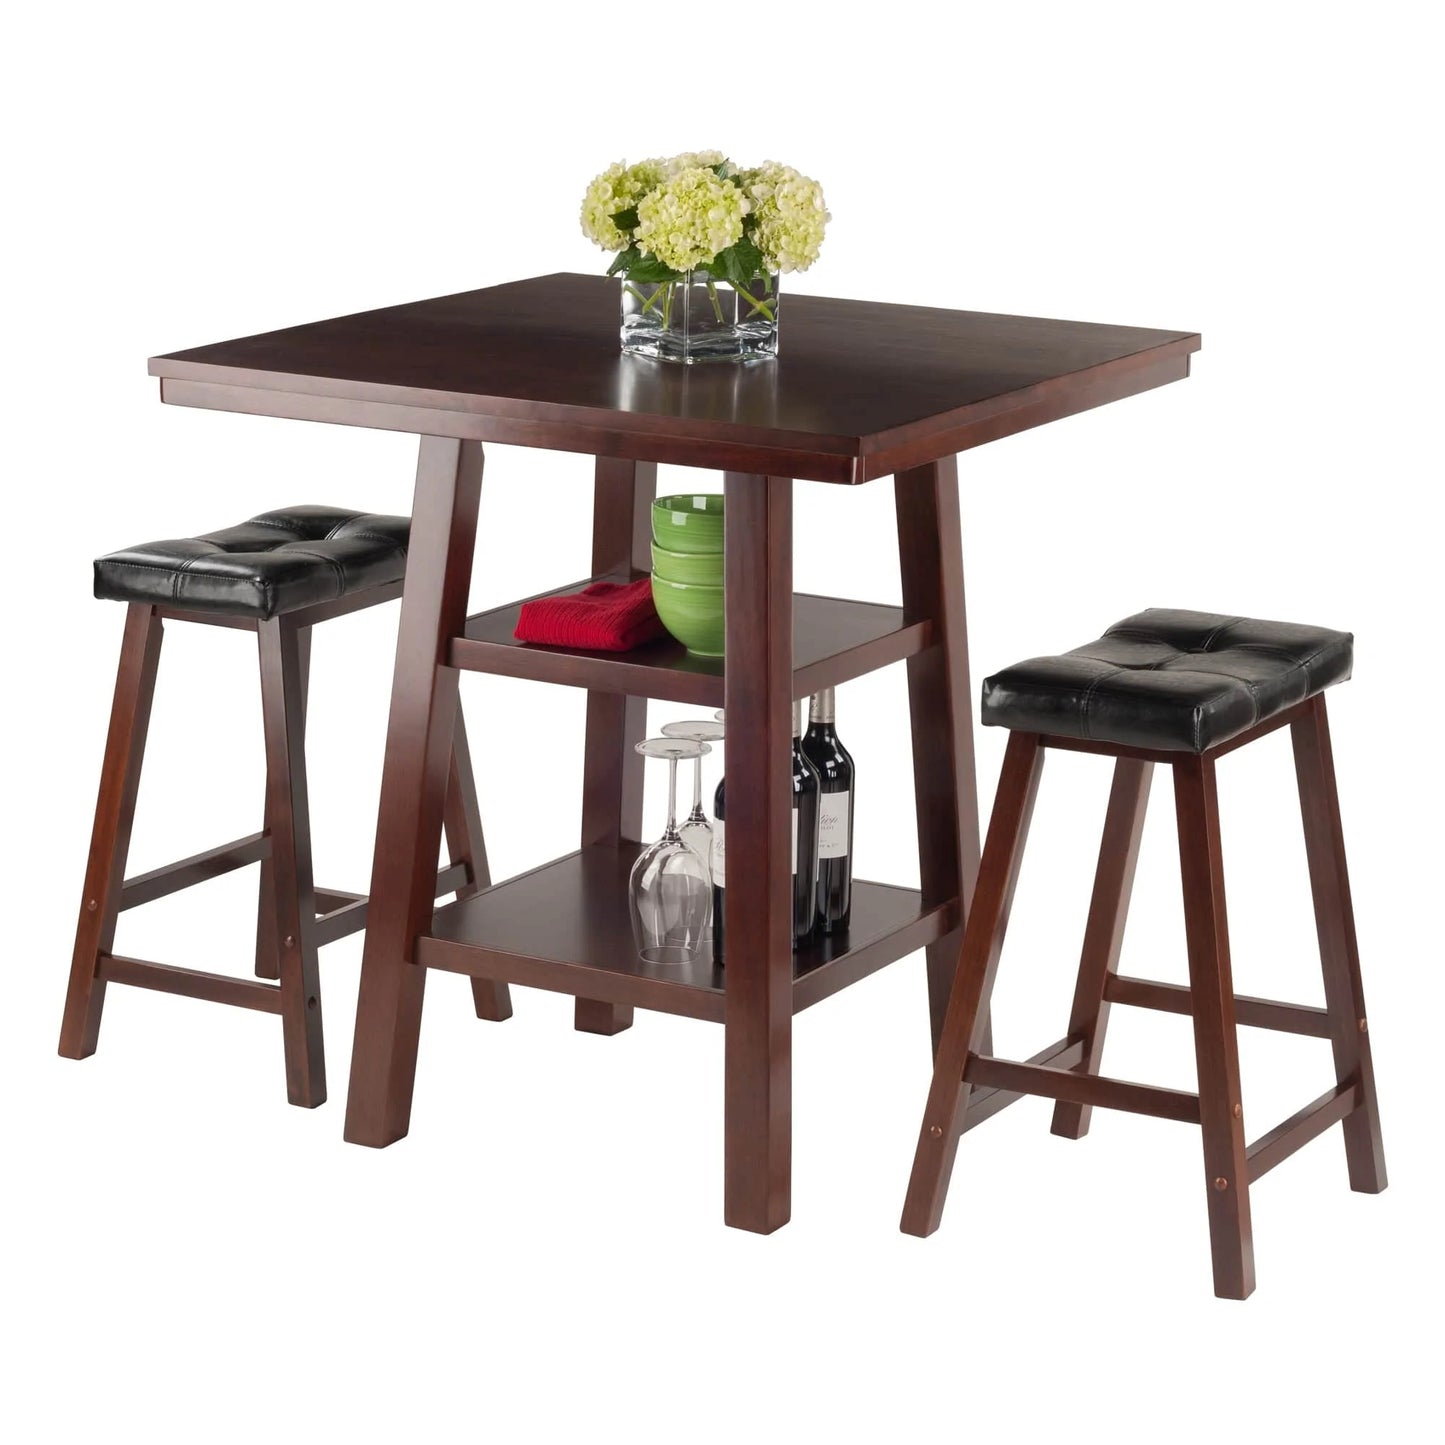 WINSOME Pub Table Set Orlando 3-Pc High Table with Cushion Saddle Seat Counter Stools, Walnut and Black